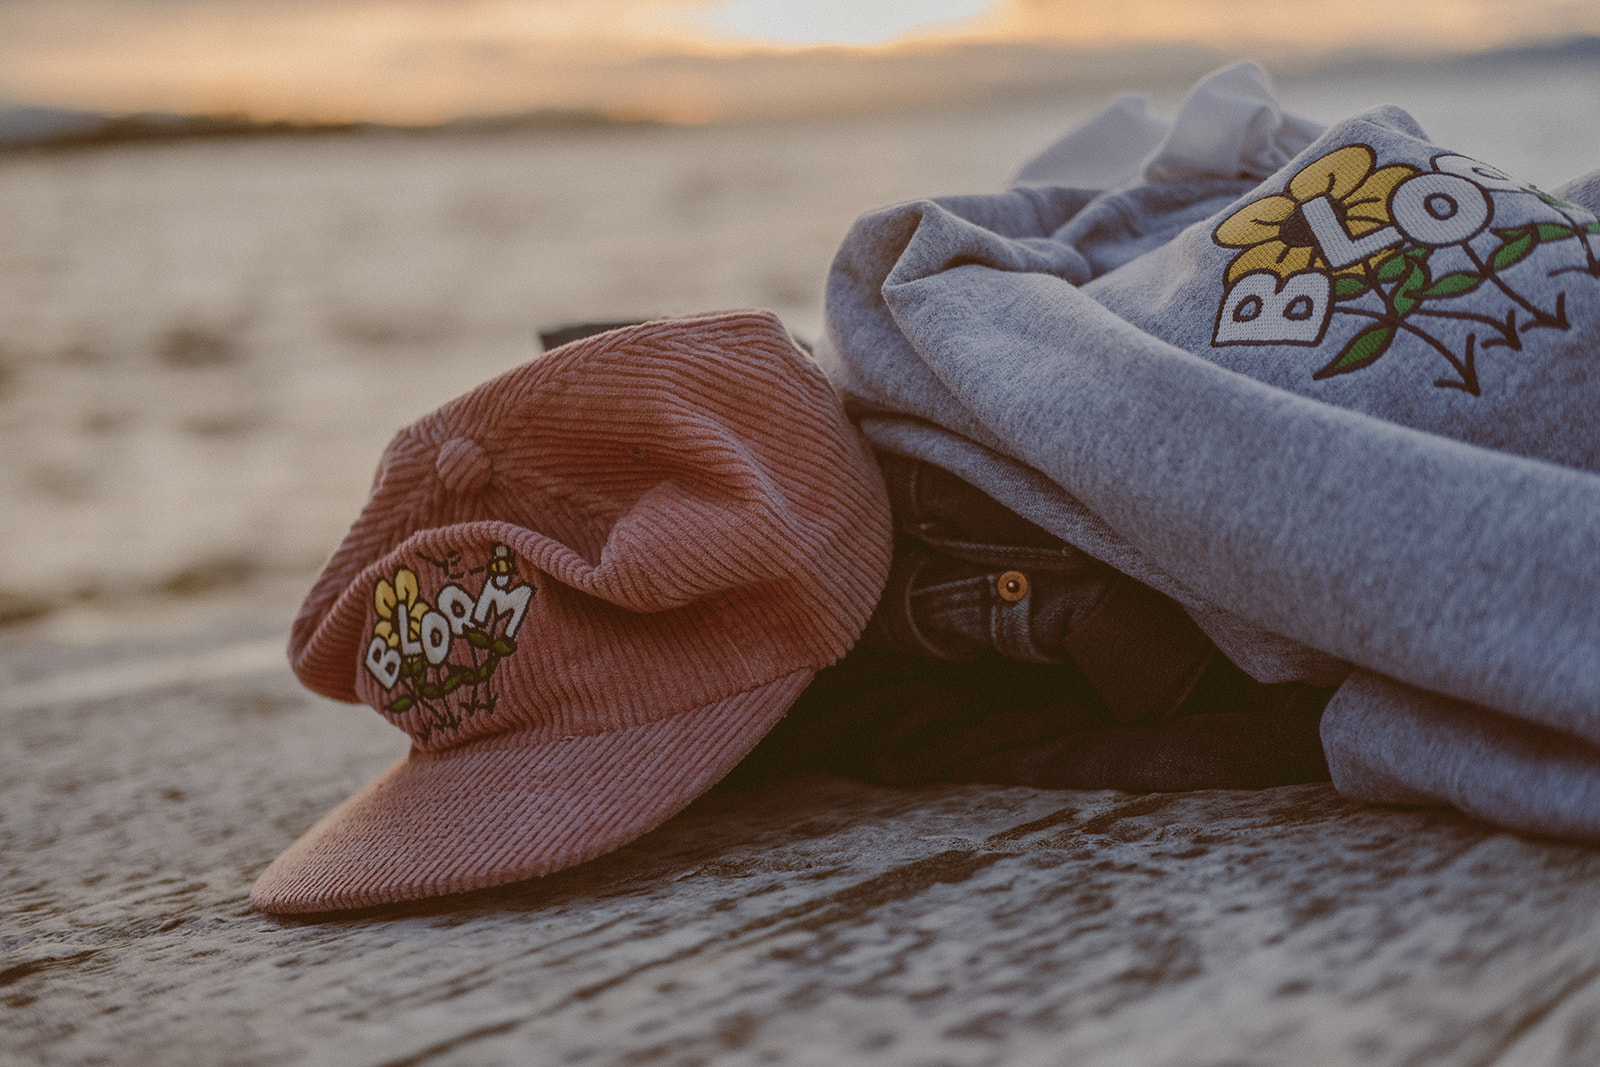 Pile of clothes with pink corduroy hat and grey crewneck with "BLOOM" logo sitting on top in front of a sunset.